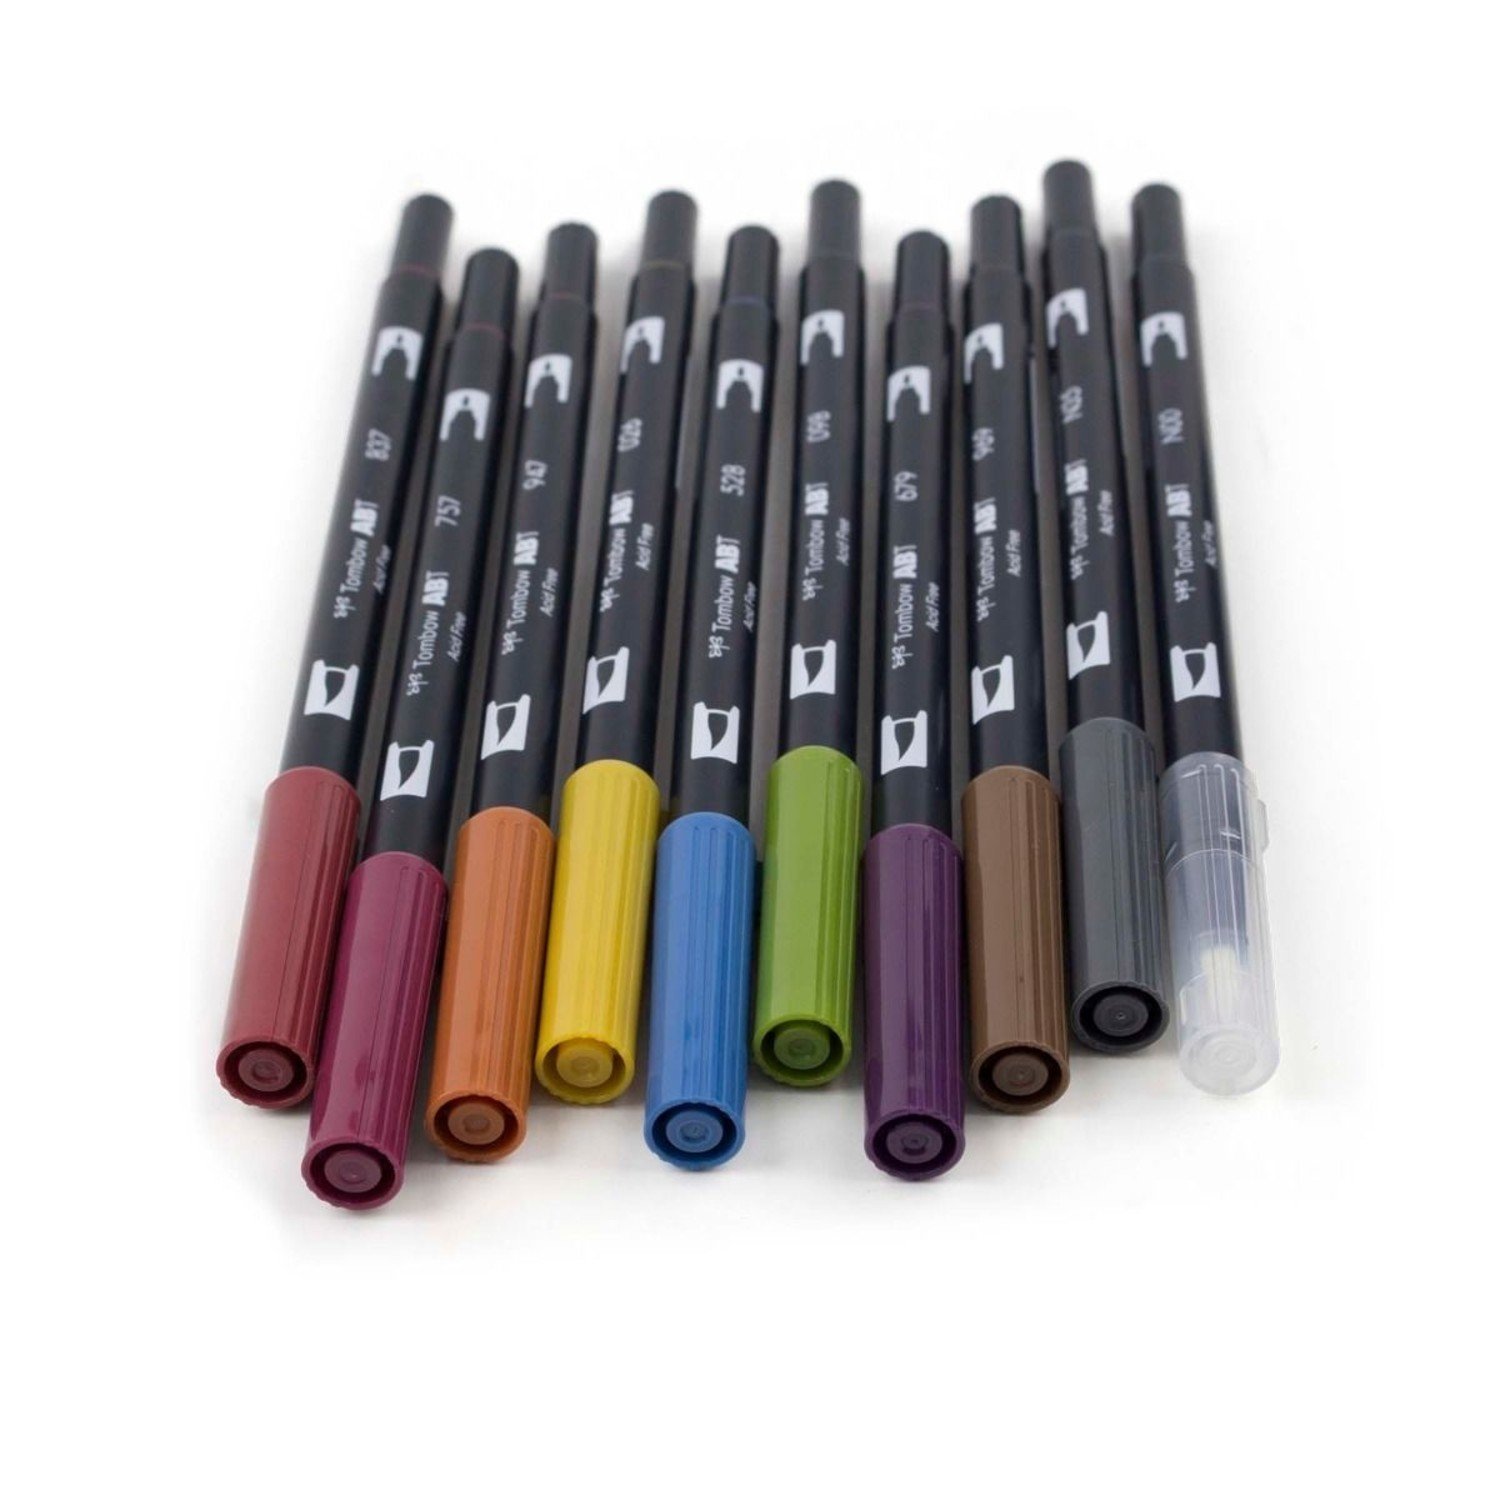 Tombow Dual Brush Pen Set of 10, Muted